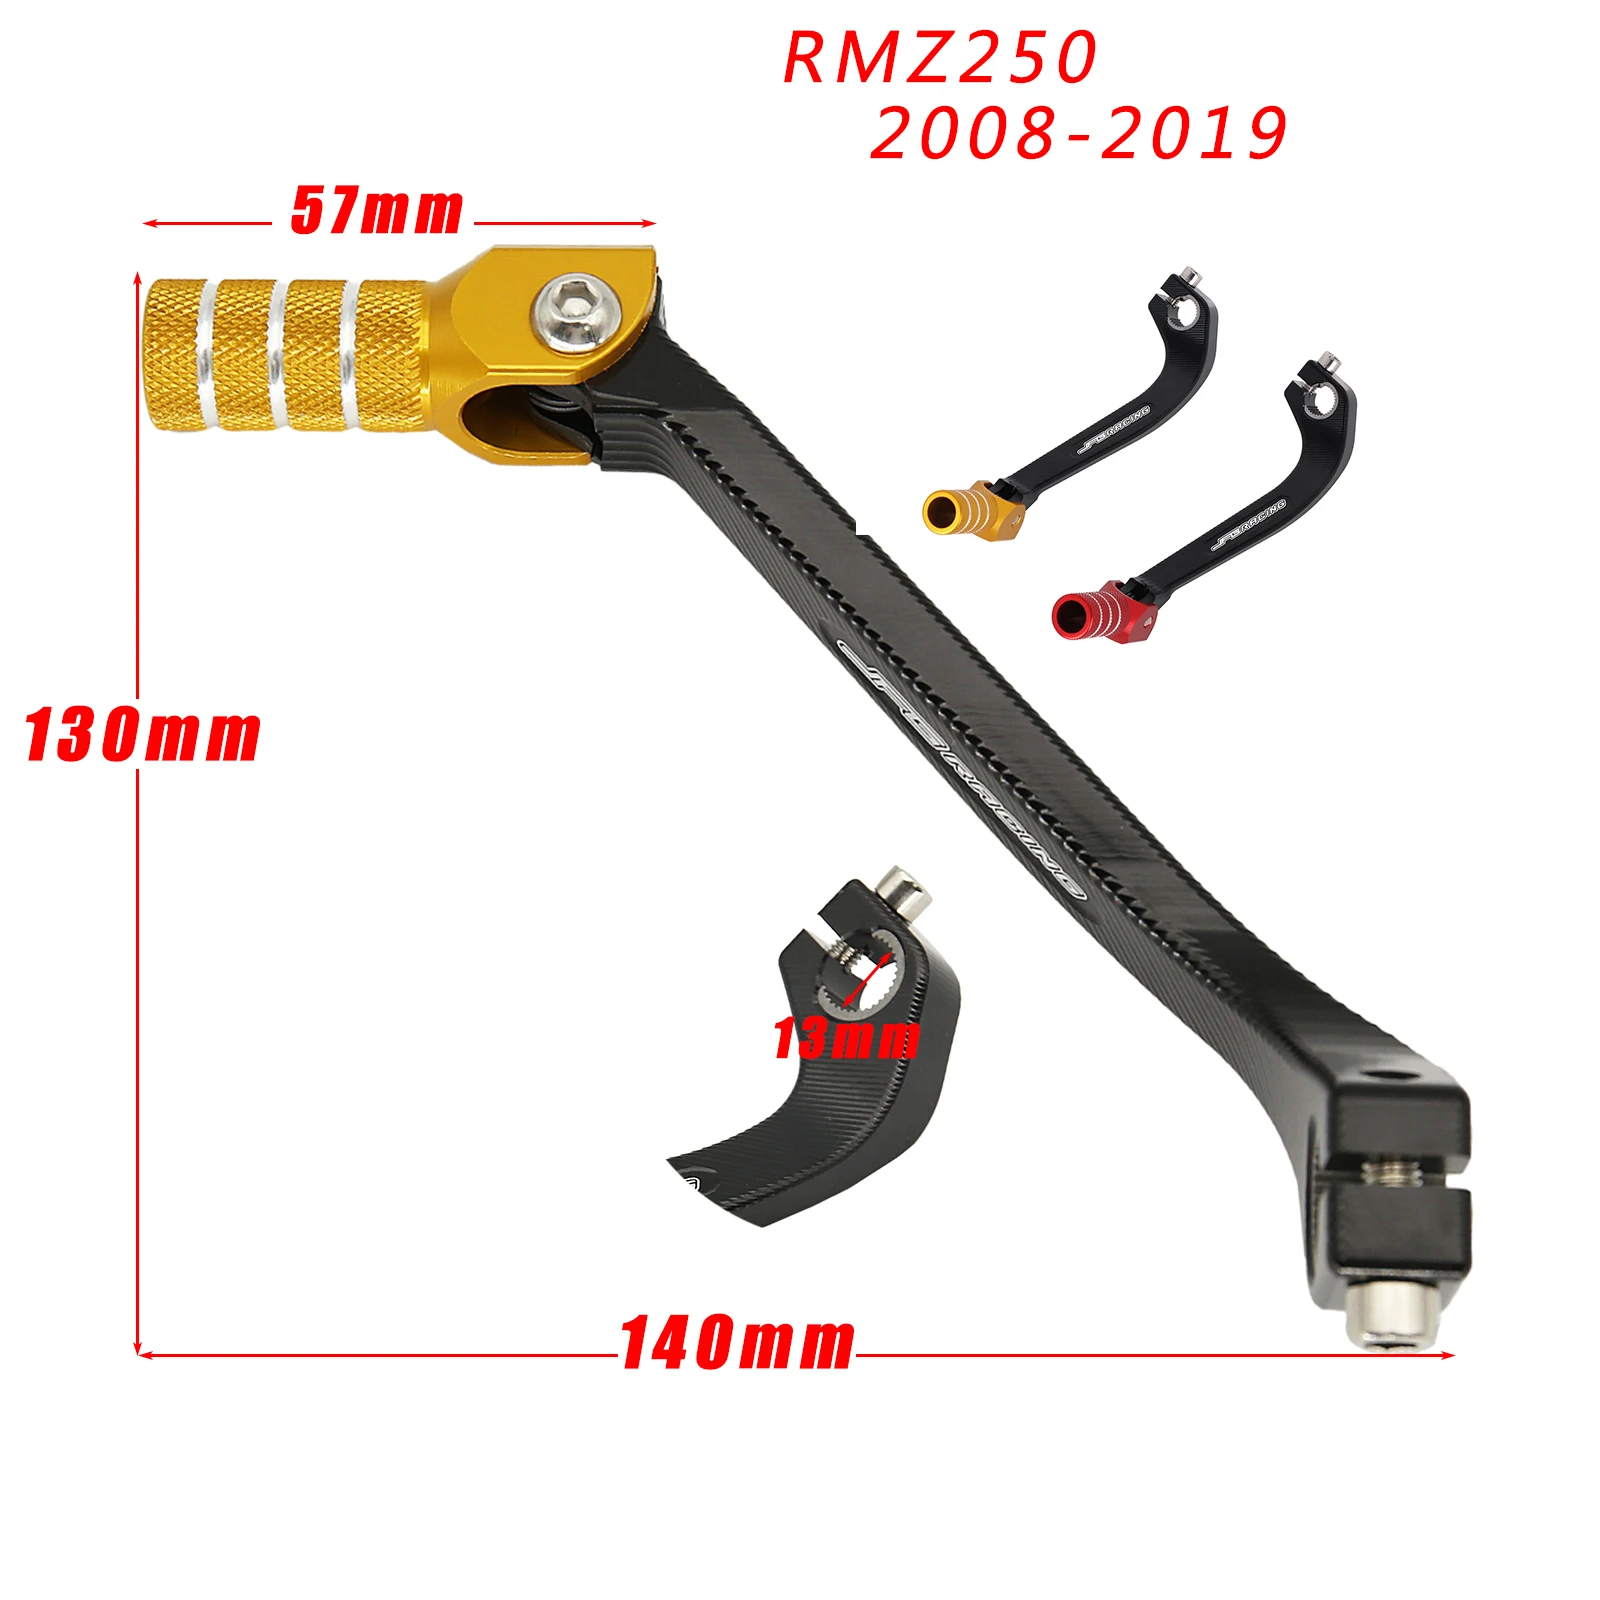 

Motorcycle CNC Fold Gold Red Gear Shift Shifter Pedal lever For SUZUKI RMZ250 rmz 250 2008-2019 2009 10 11 12 13 14 15 16 17